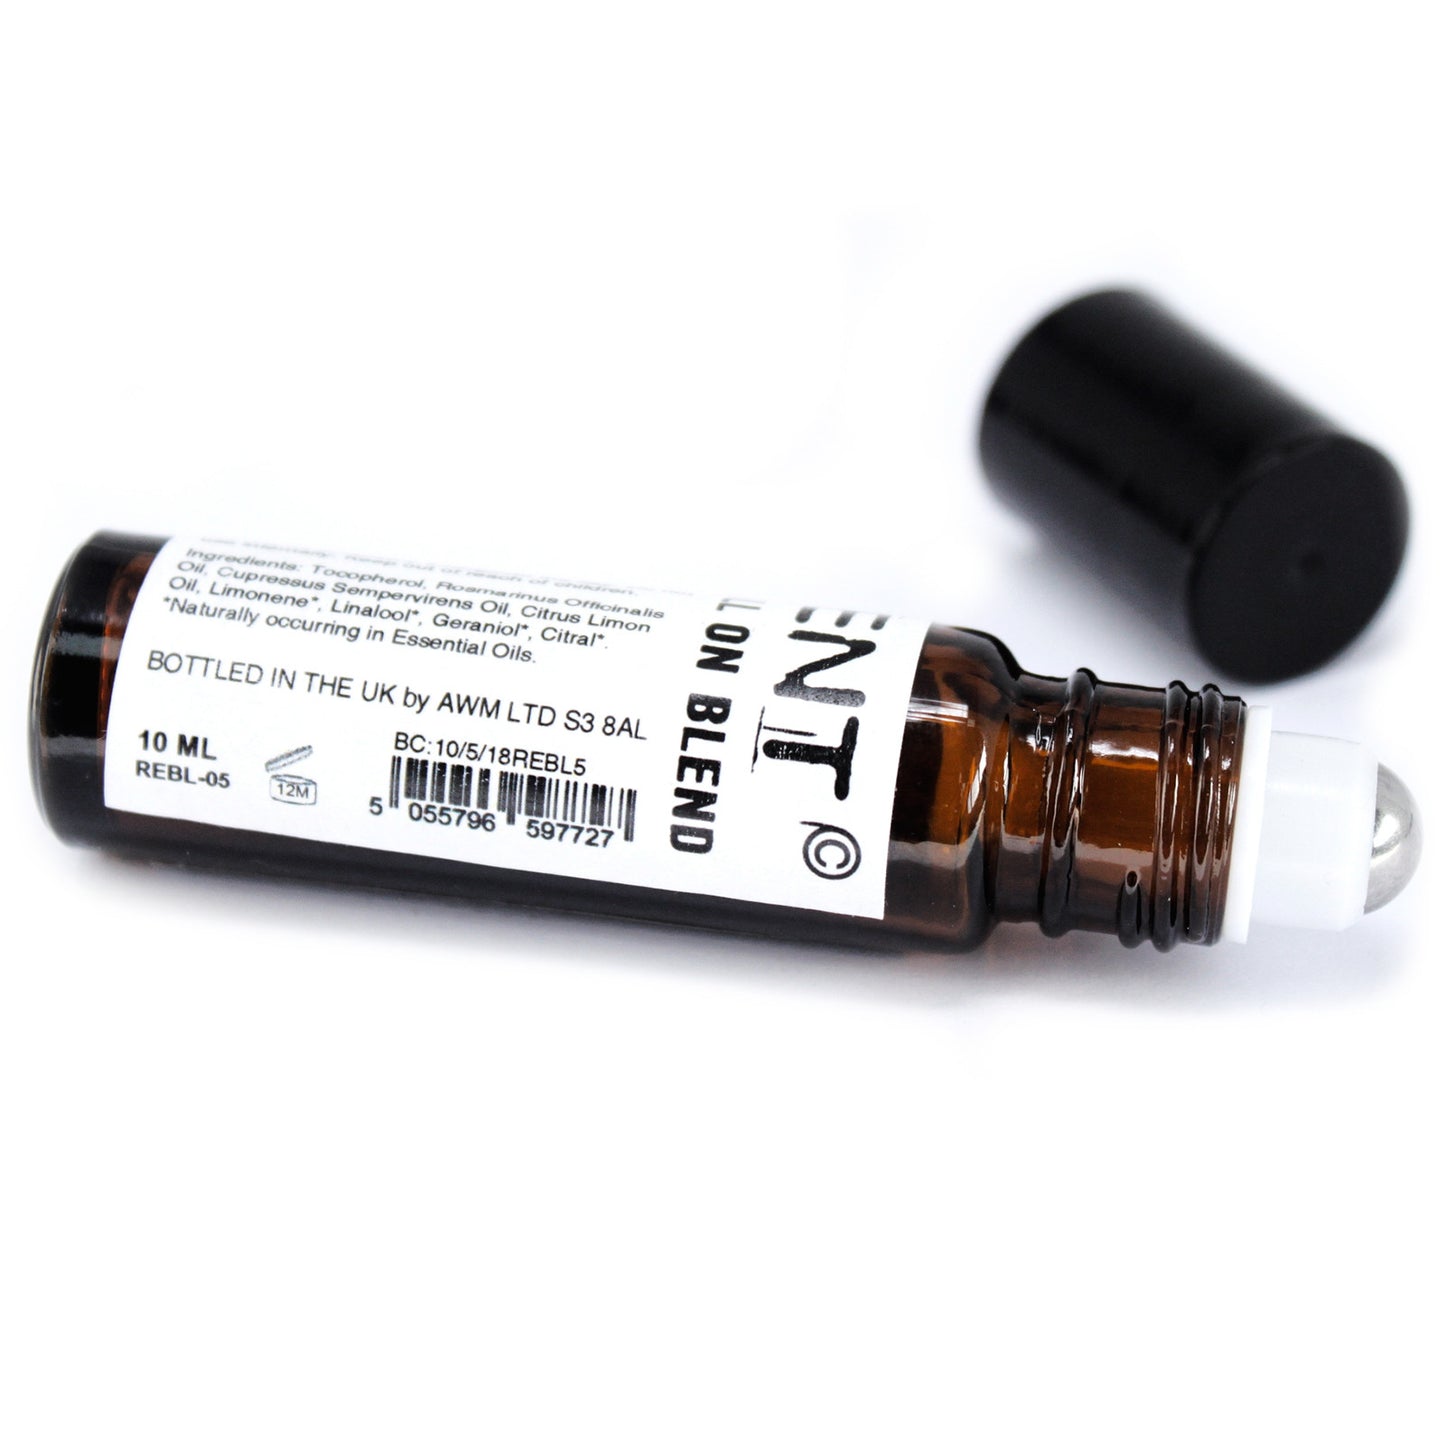 Cheer Up! - 10ml Roll On Essential Oil Blend